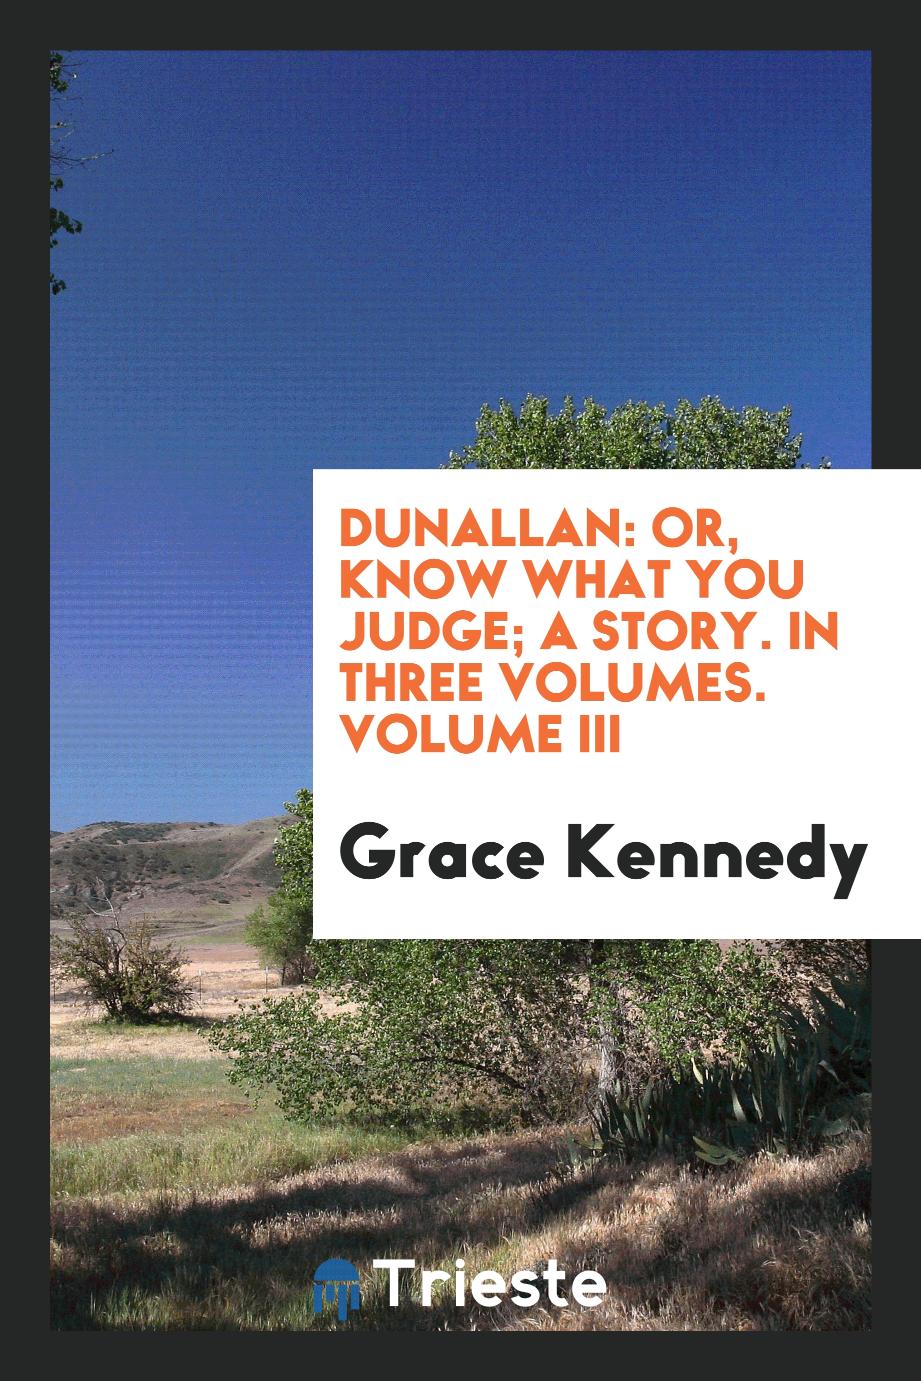 Dunallan: Or, Know What You Judge; A Story. In Three Volumes. Volume III